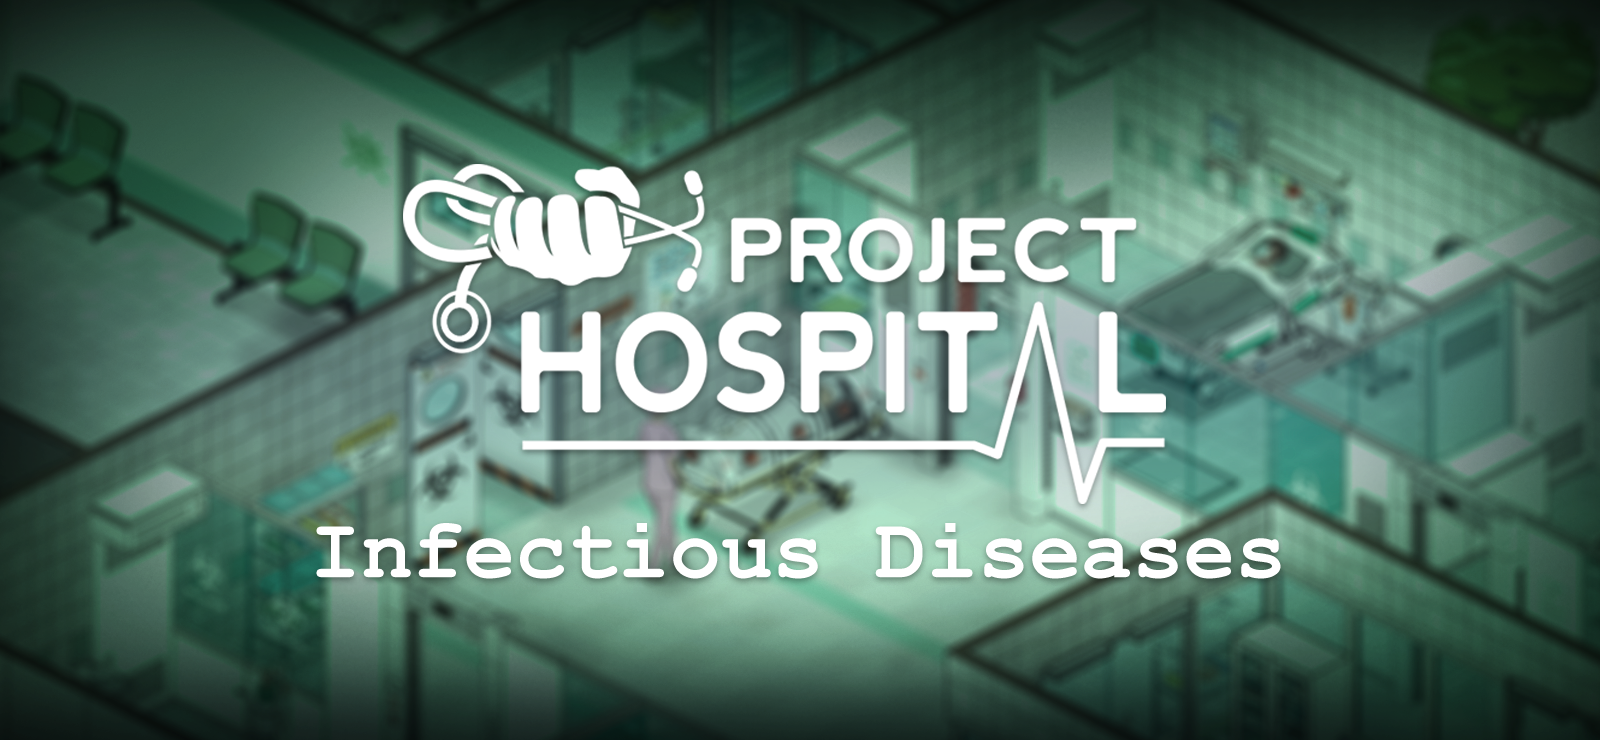 Project Hospital - Department Of Infectious Diseases